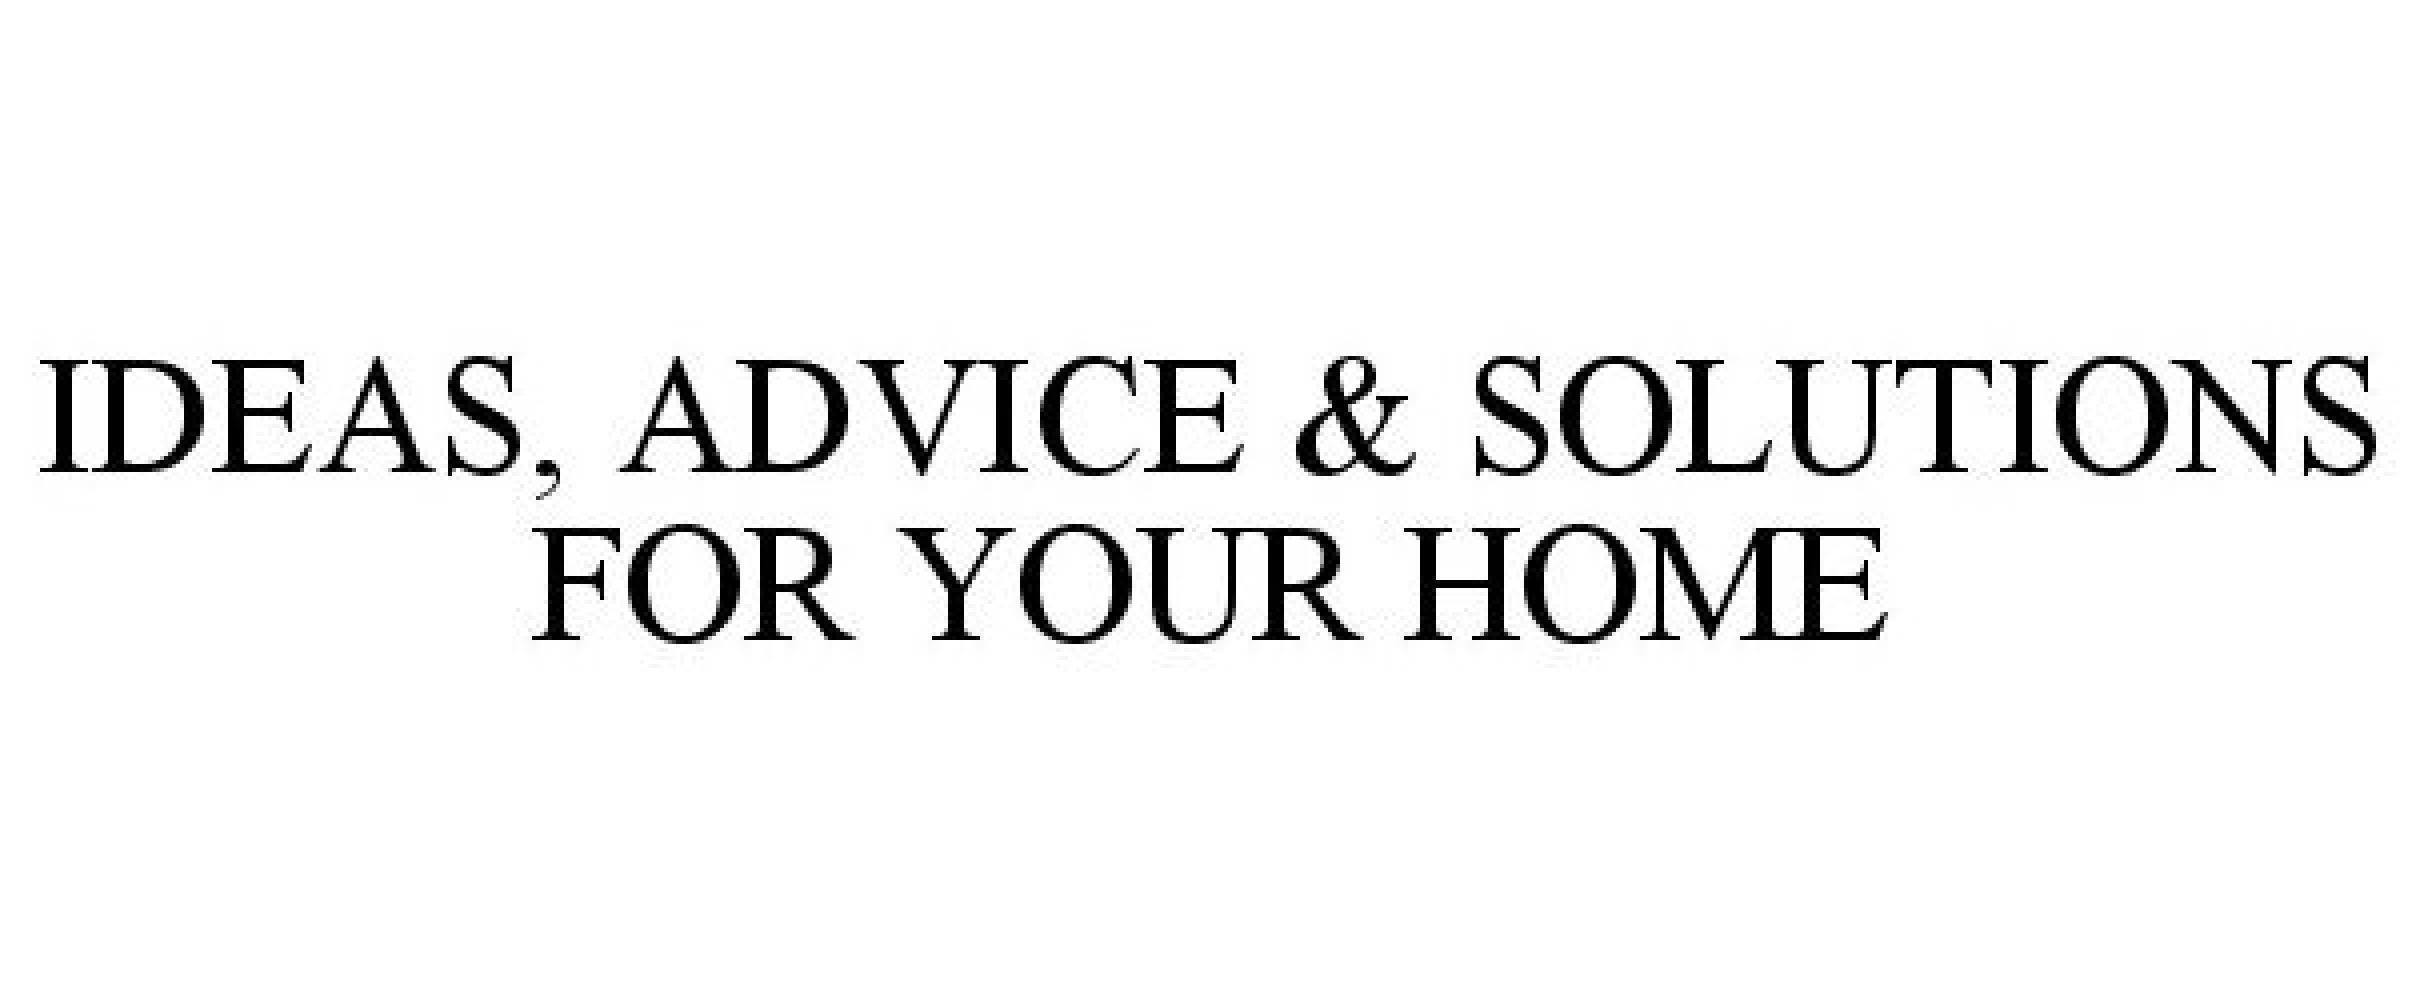  IDEAS, ADVICE &amp; SOLUTIONS FOR YOUR HOME